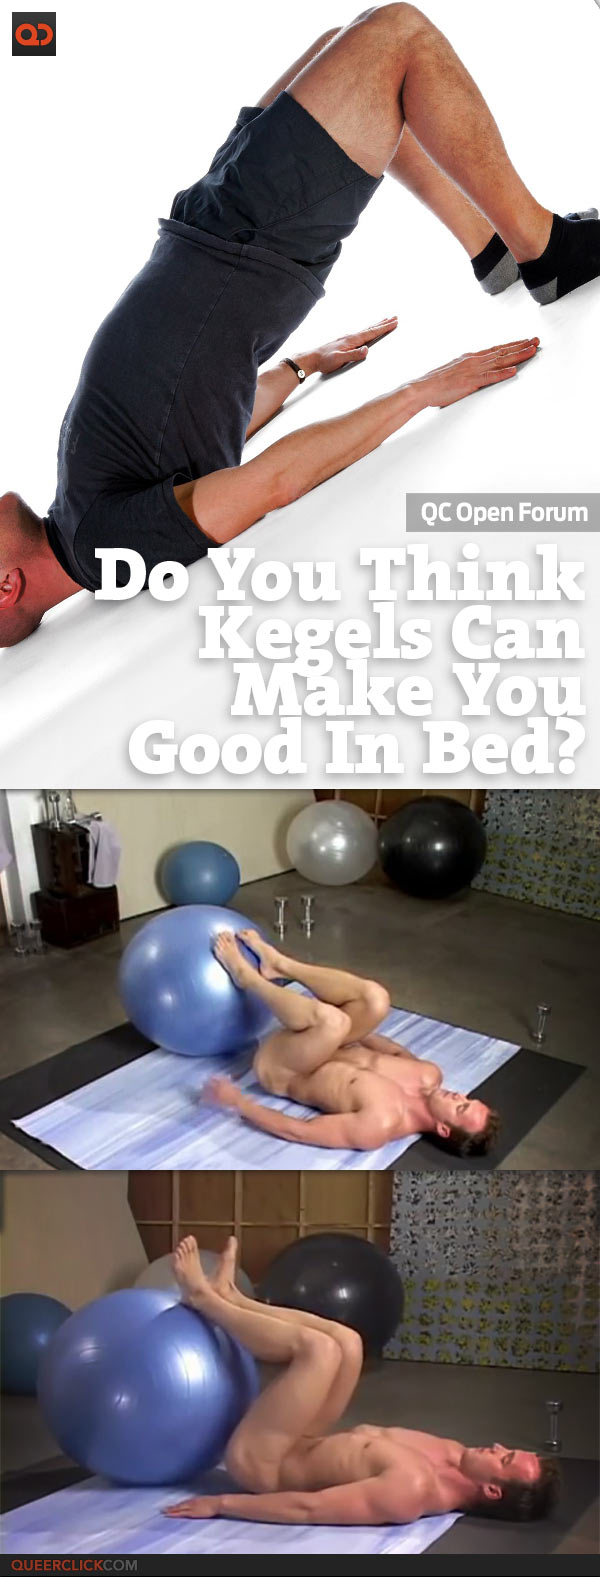 QC Open Forum: Do You Think Kegels Can Make You Good In Bed?